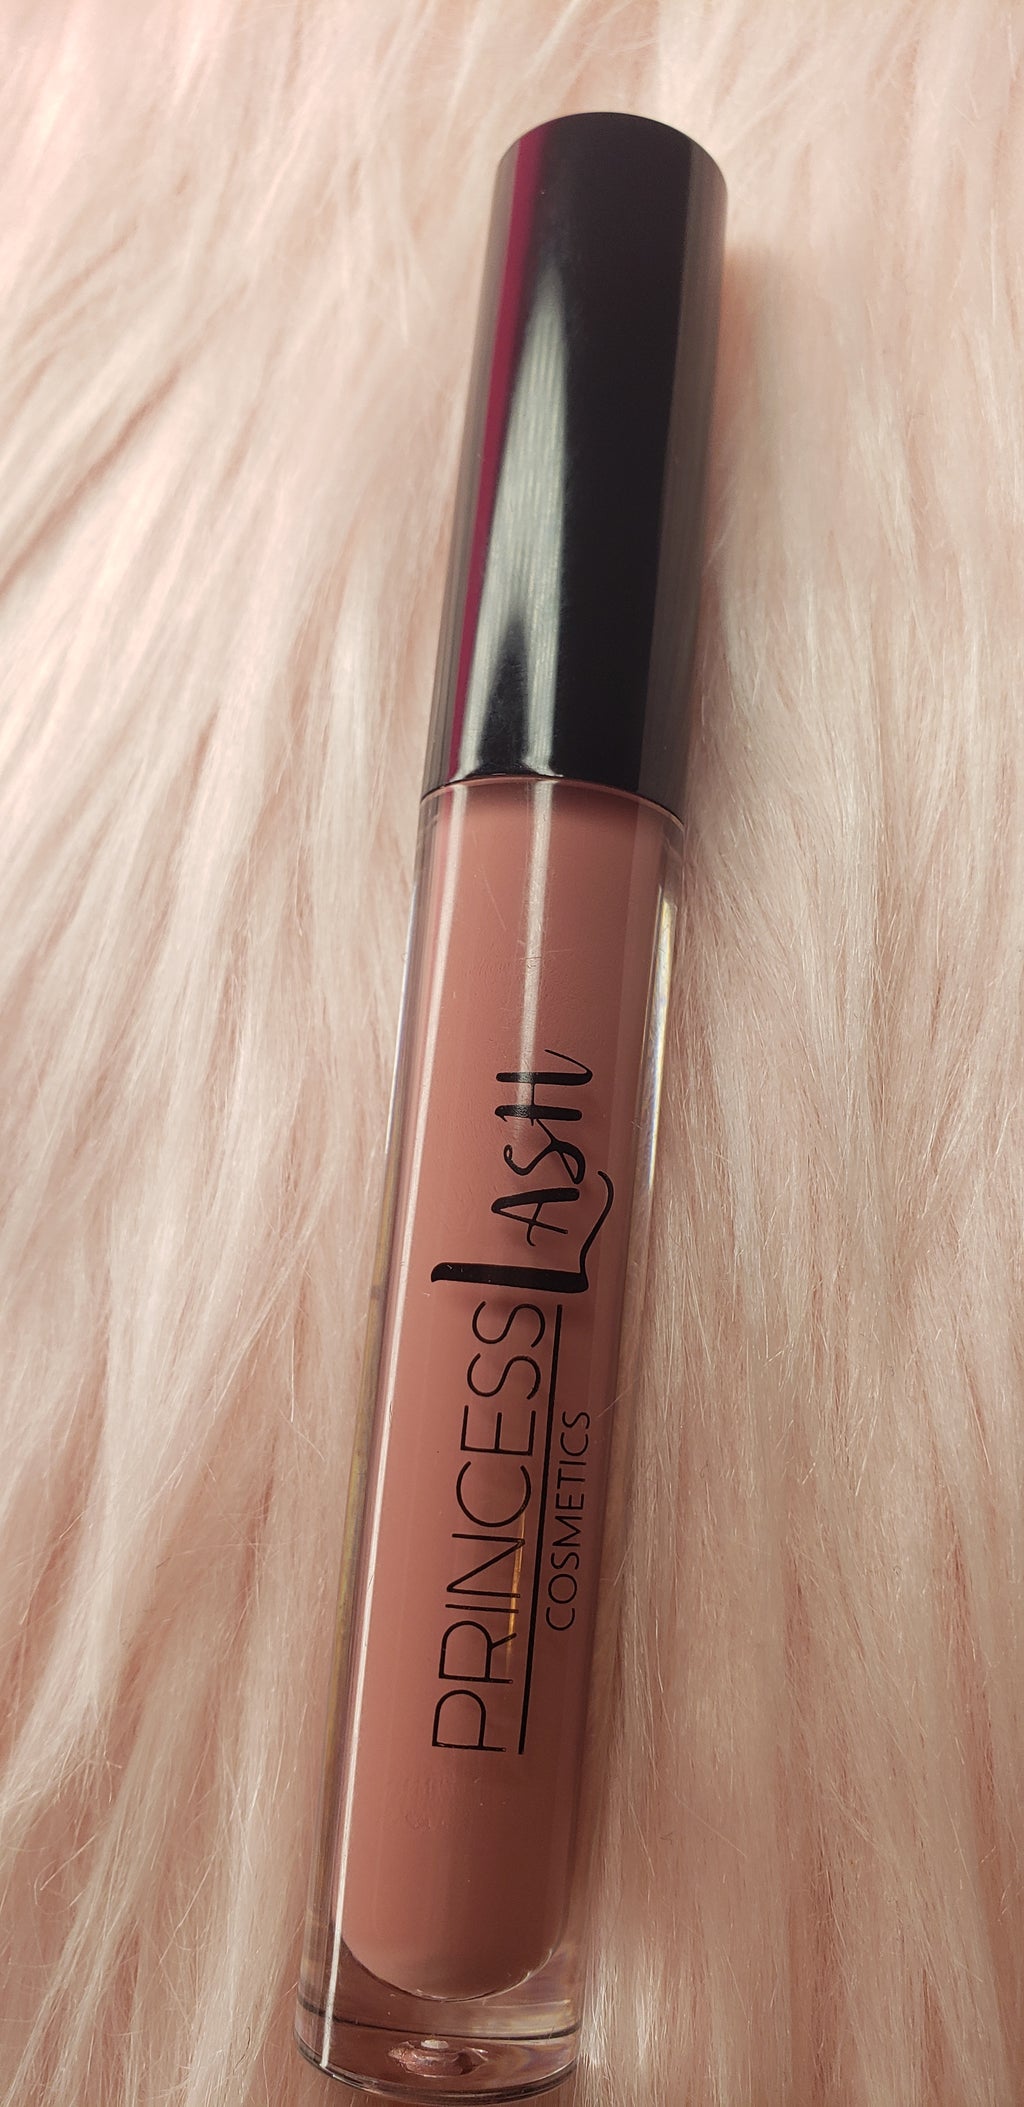 Princess Nude lip gloss from Princess Lash, LLC. A black owned cosmetic line